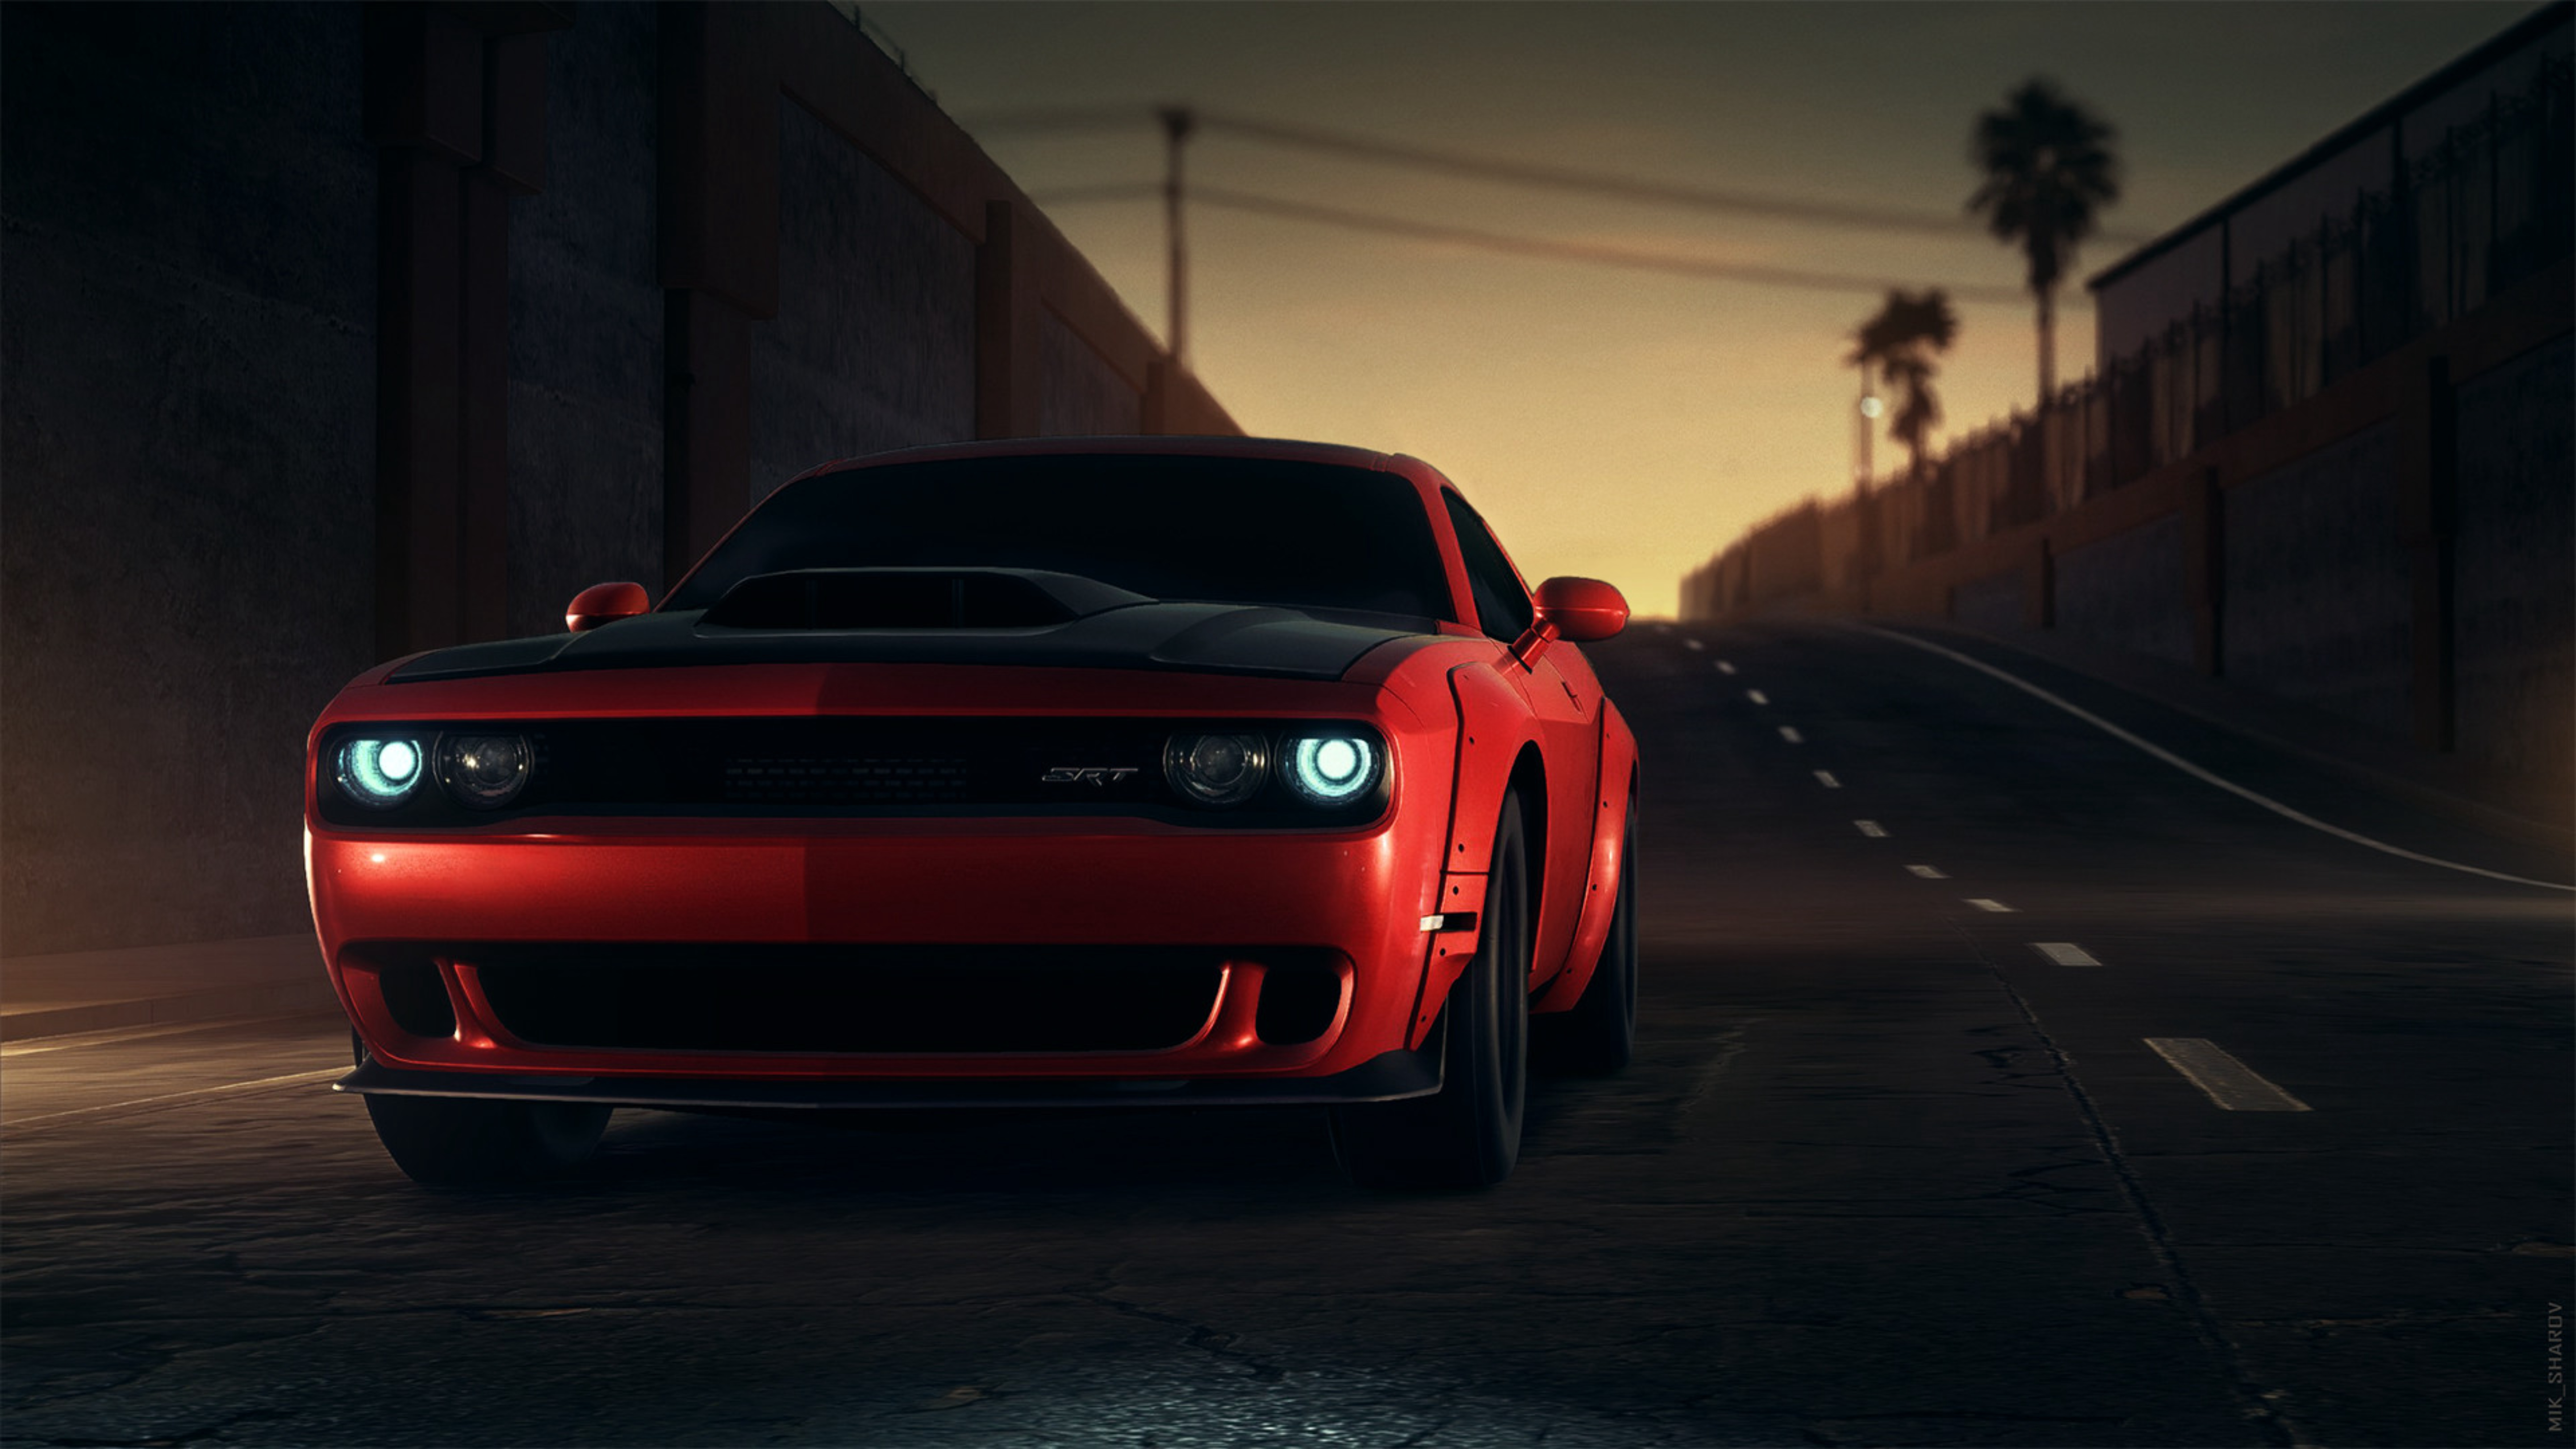 cars, front view, sports car, dodge srt, dodge, headlights, lights, red, sports for android